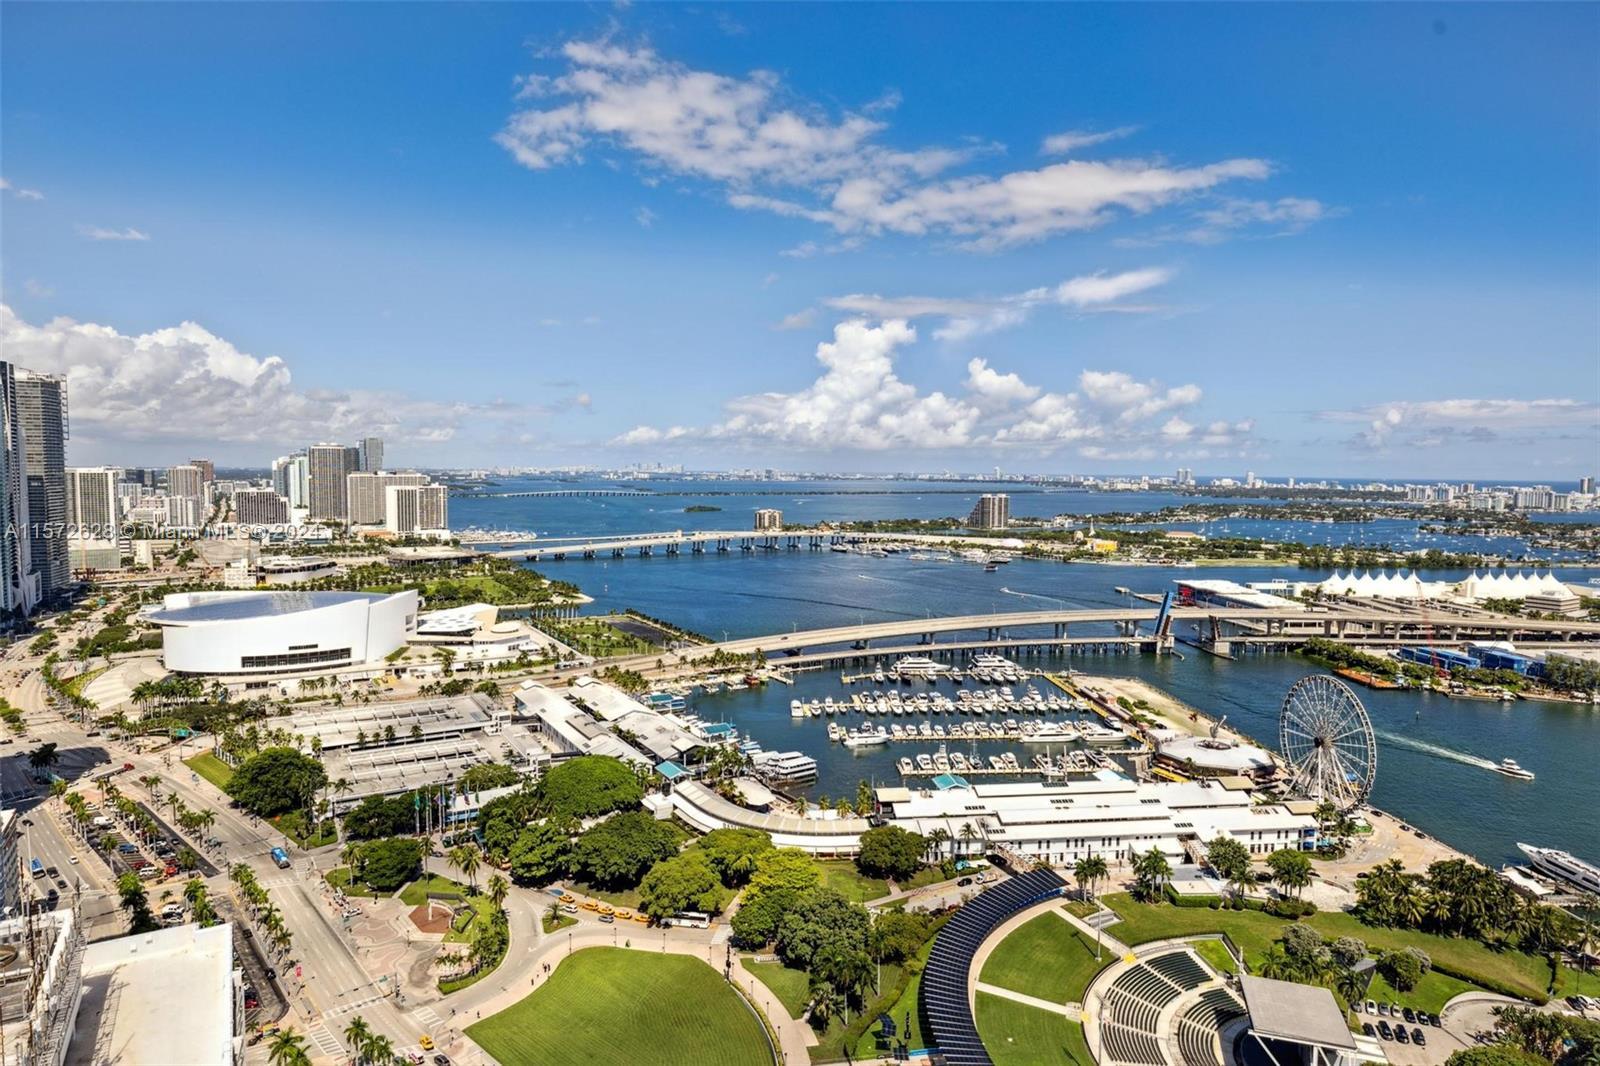 Best line in 50 Biscayne with the most desirable floor plan. This spacious 3 bedroom and 2 bath corn